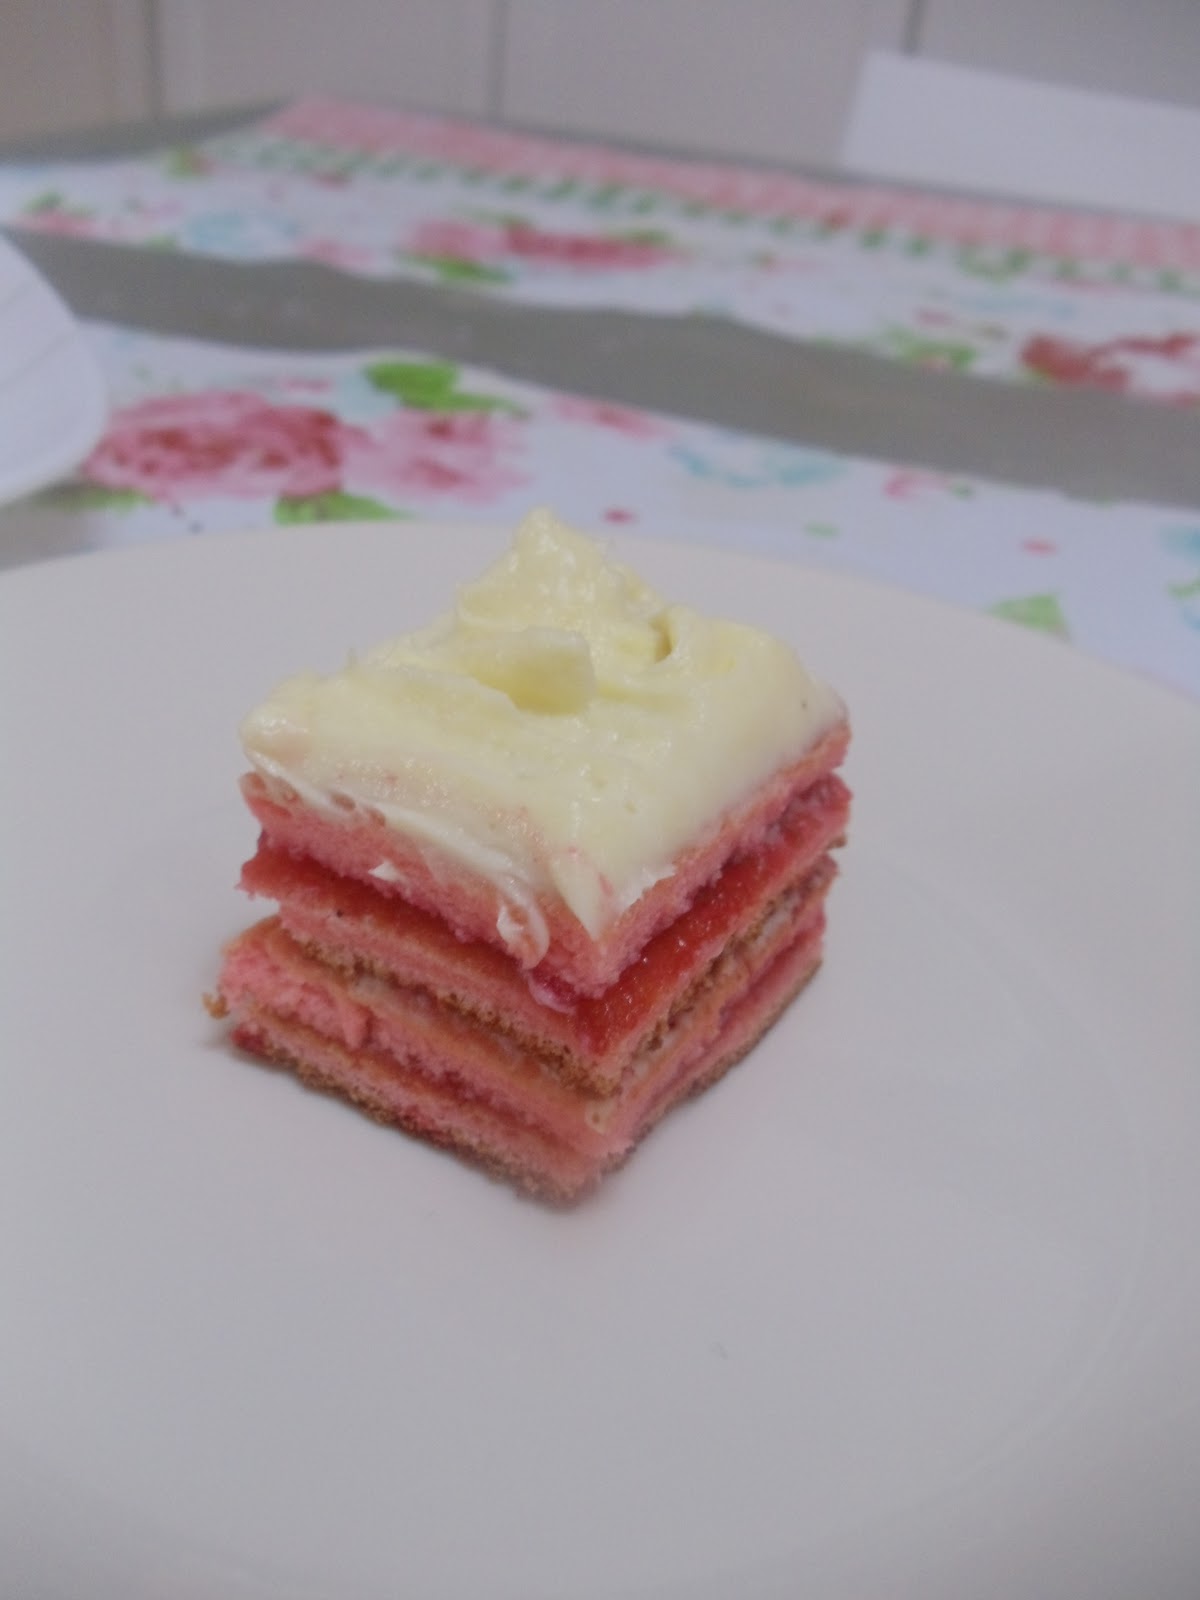 Life is colorful: Kek Lapis Strawberry Cheese